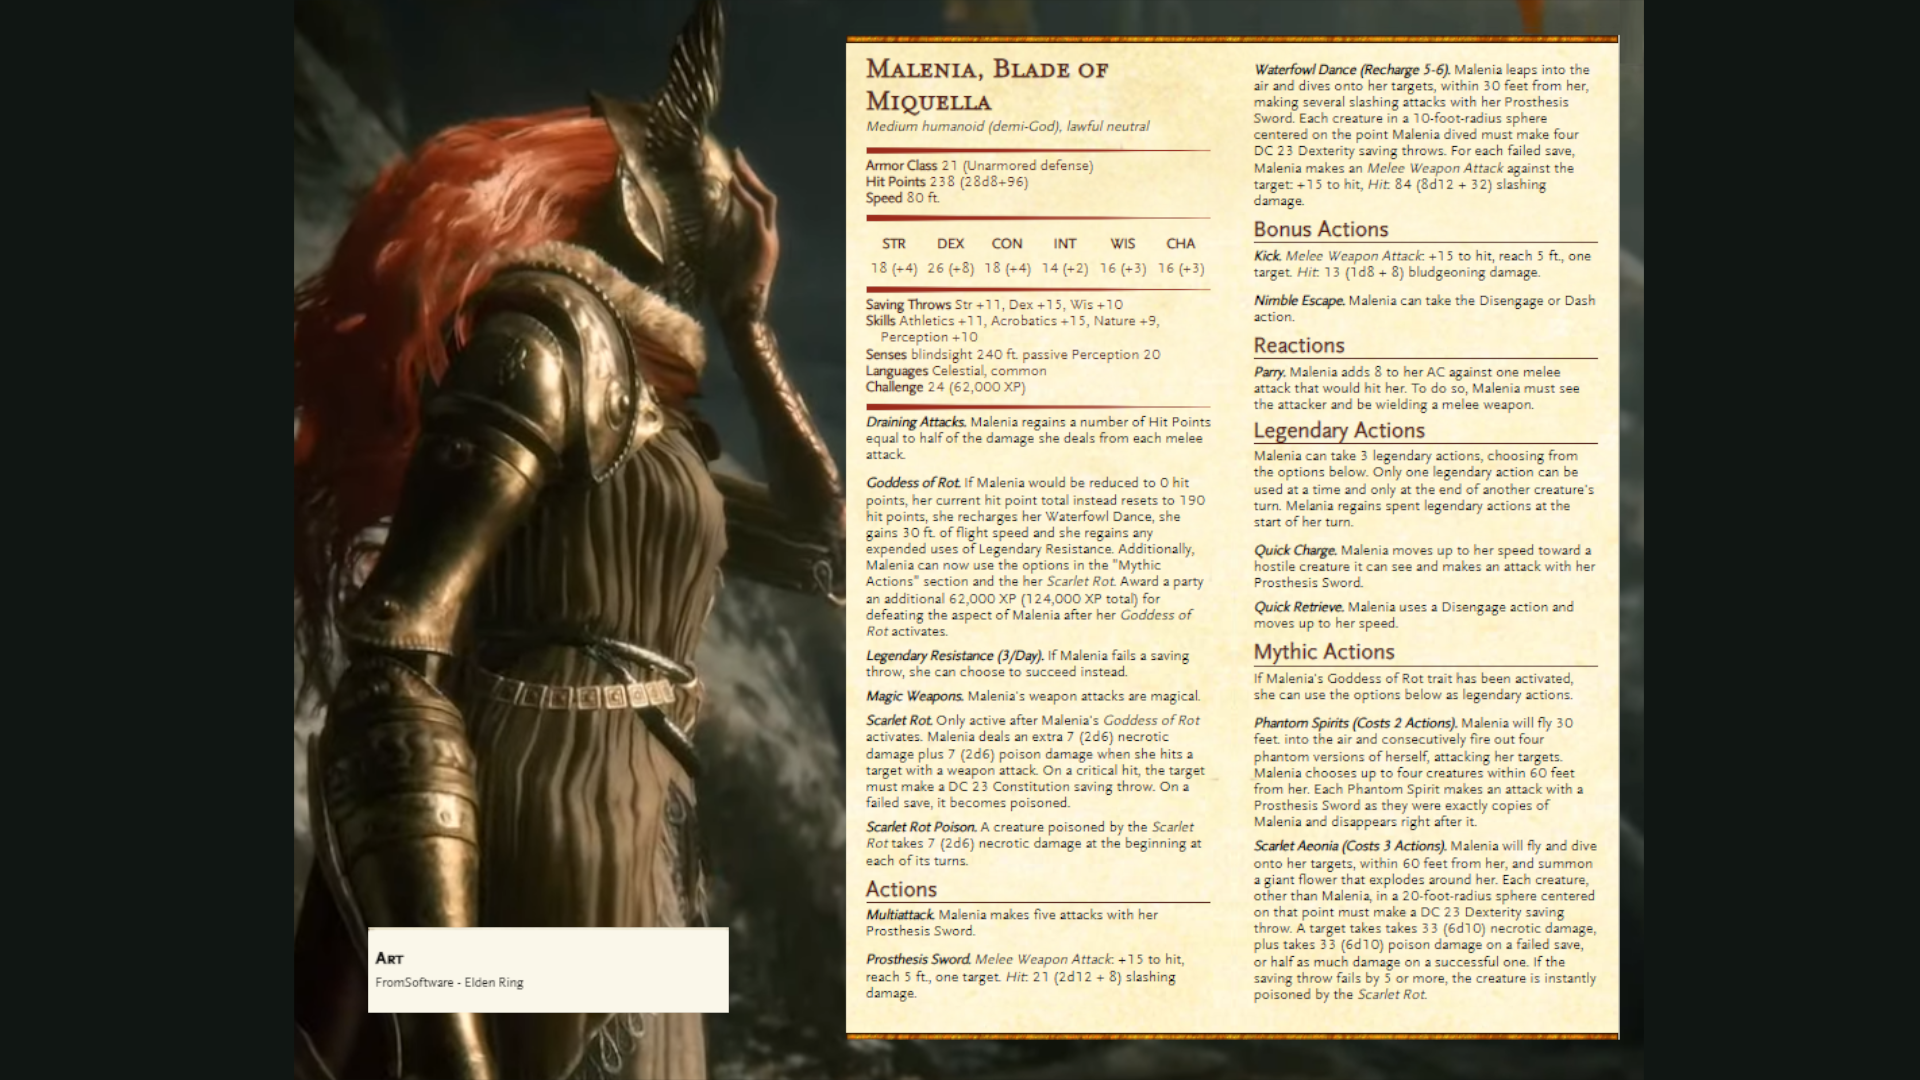 Elden Ring D&D stat blocks let you fight Malenia, Radahn and more in 5E